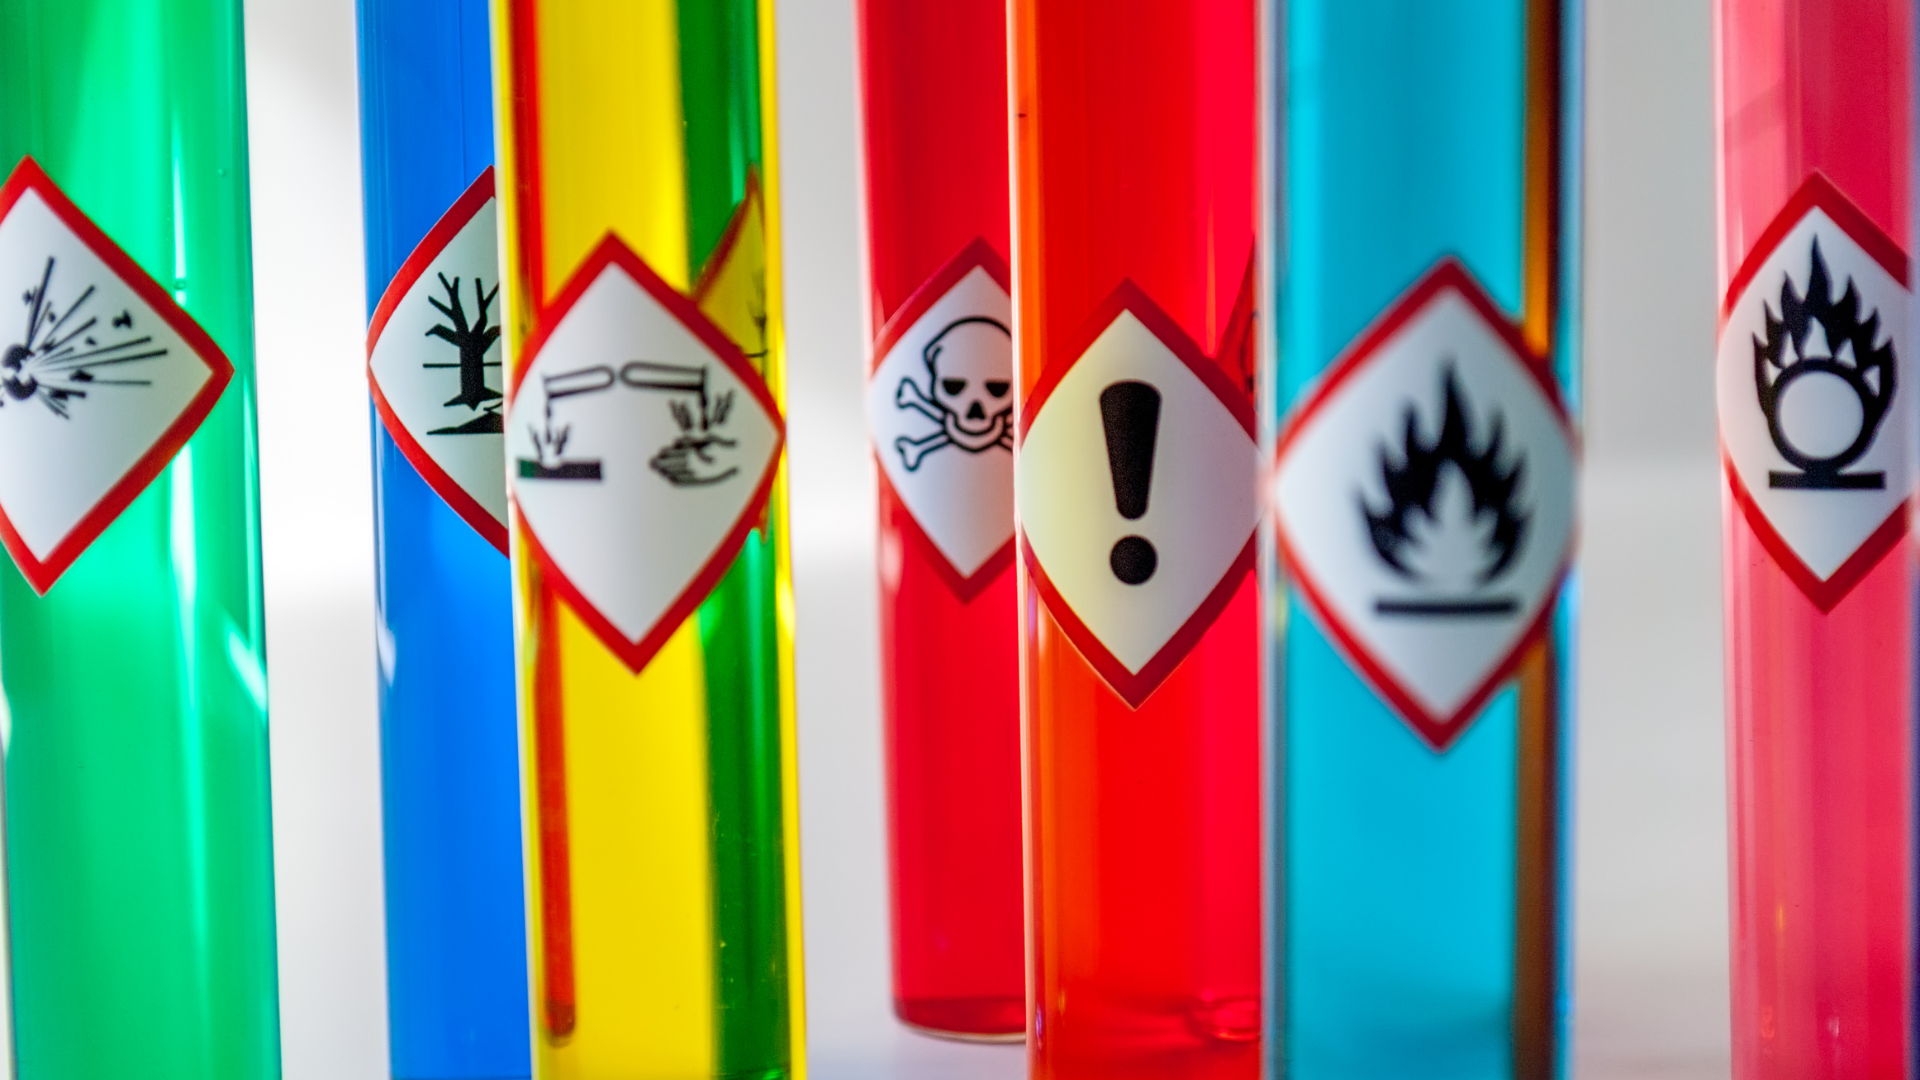 What is Required to Mark and Label Dangerous Goods Packages in Canada?